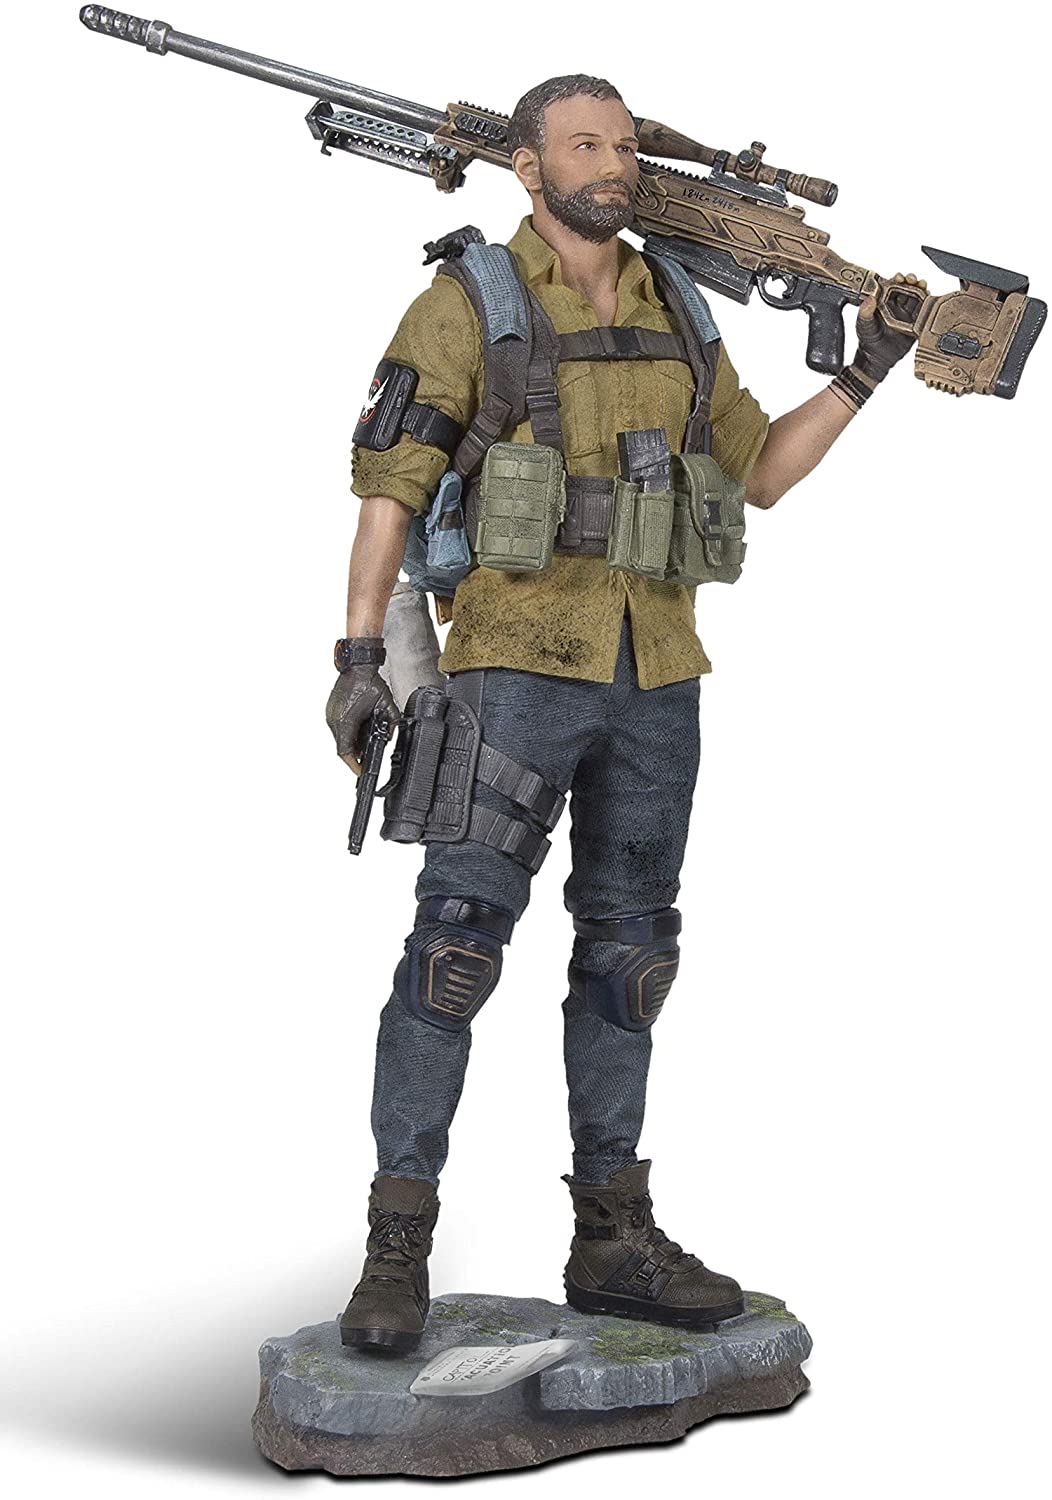 Tom Clancy's The Division 2 Brian Johnson Agent Figure 25cm